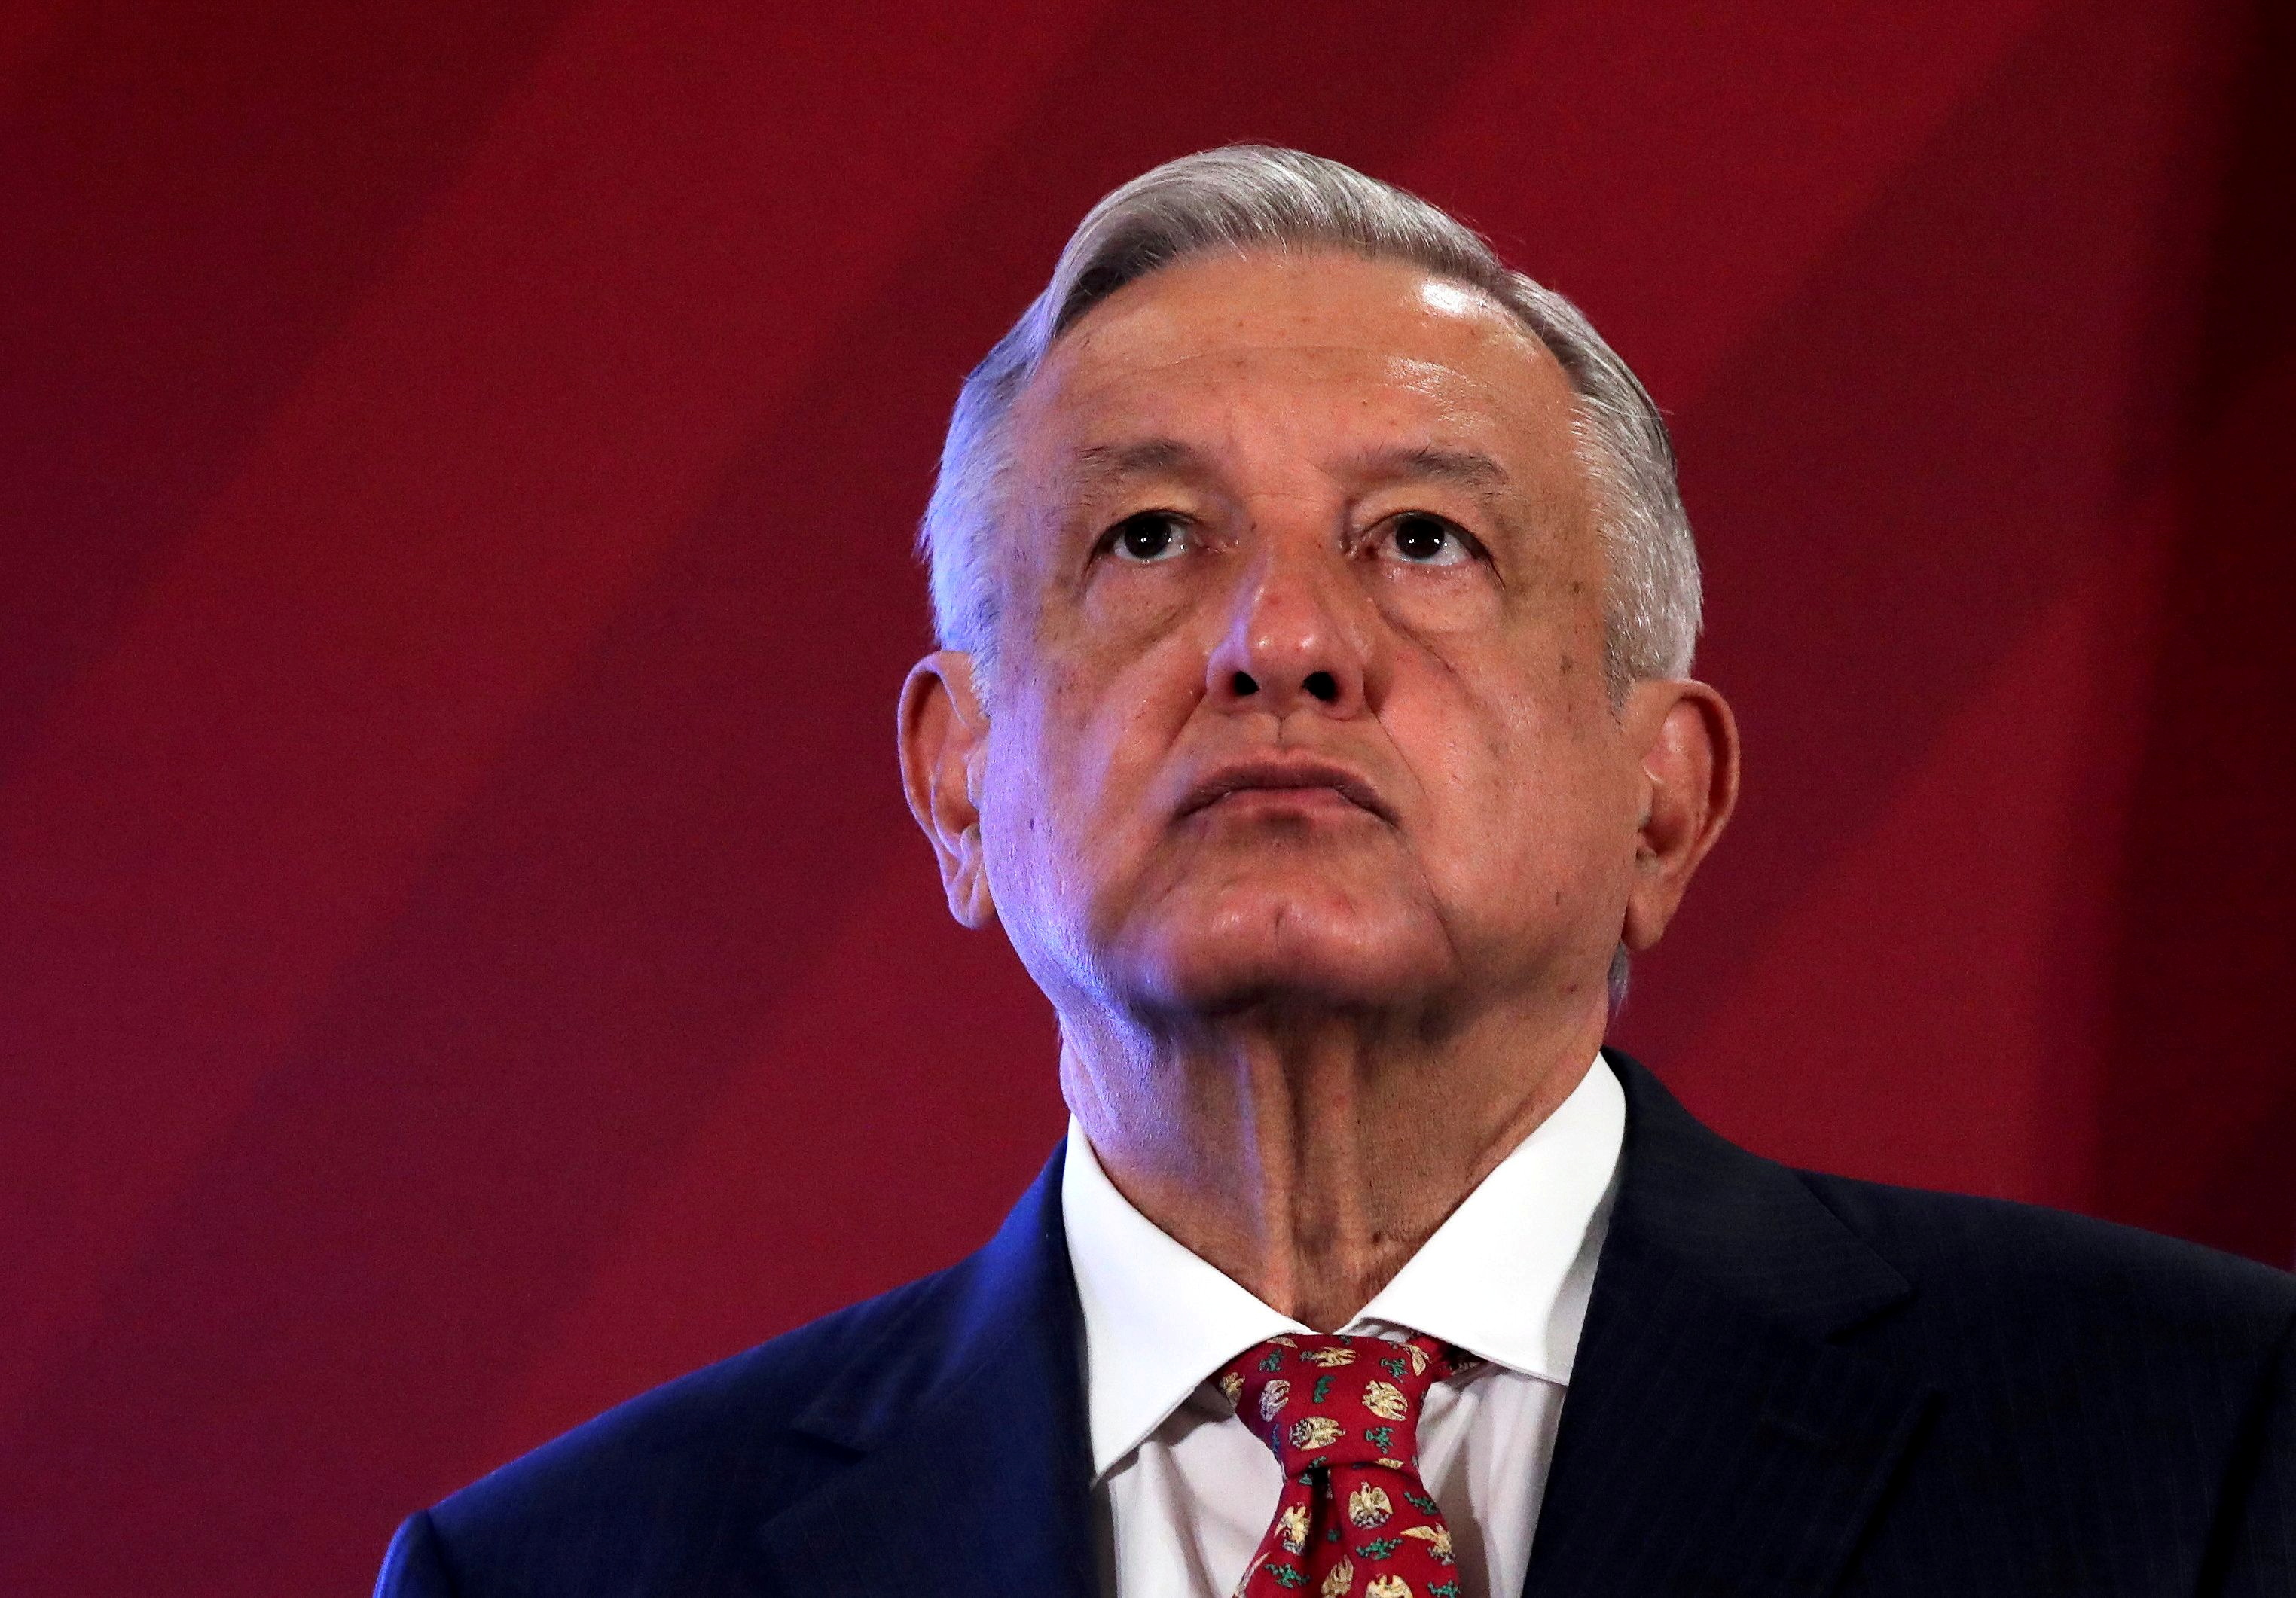 FILE PHOTO: Mexico's President Andres Manuel Lopez Obrador looks up during a news conference at the National Palace in Mexico City, Mexico June 30, 2020. Picture taken June 30, 2020. REUTERS/Henry Romero/File Photo